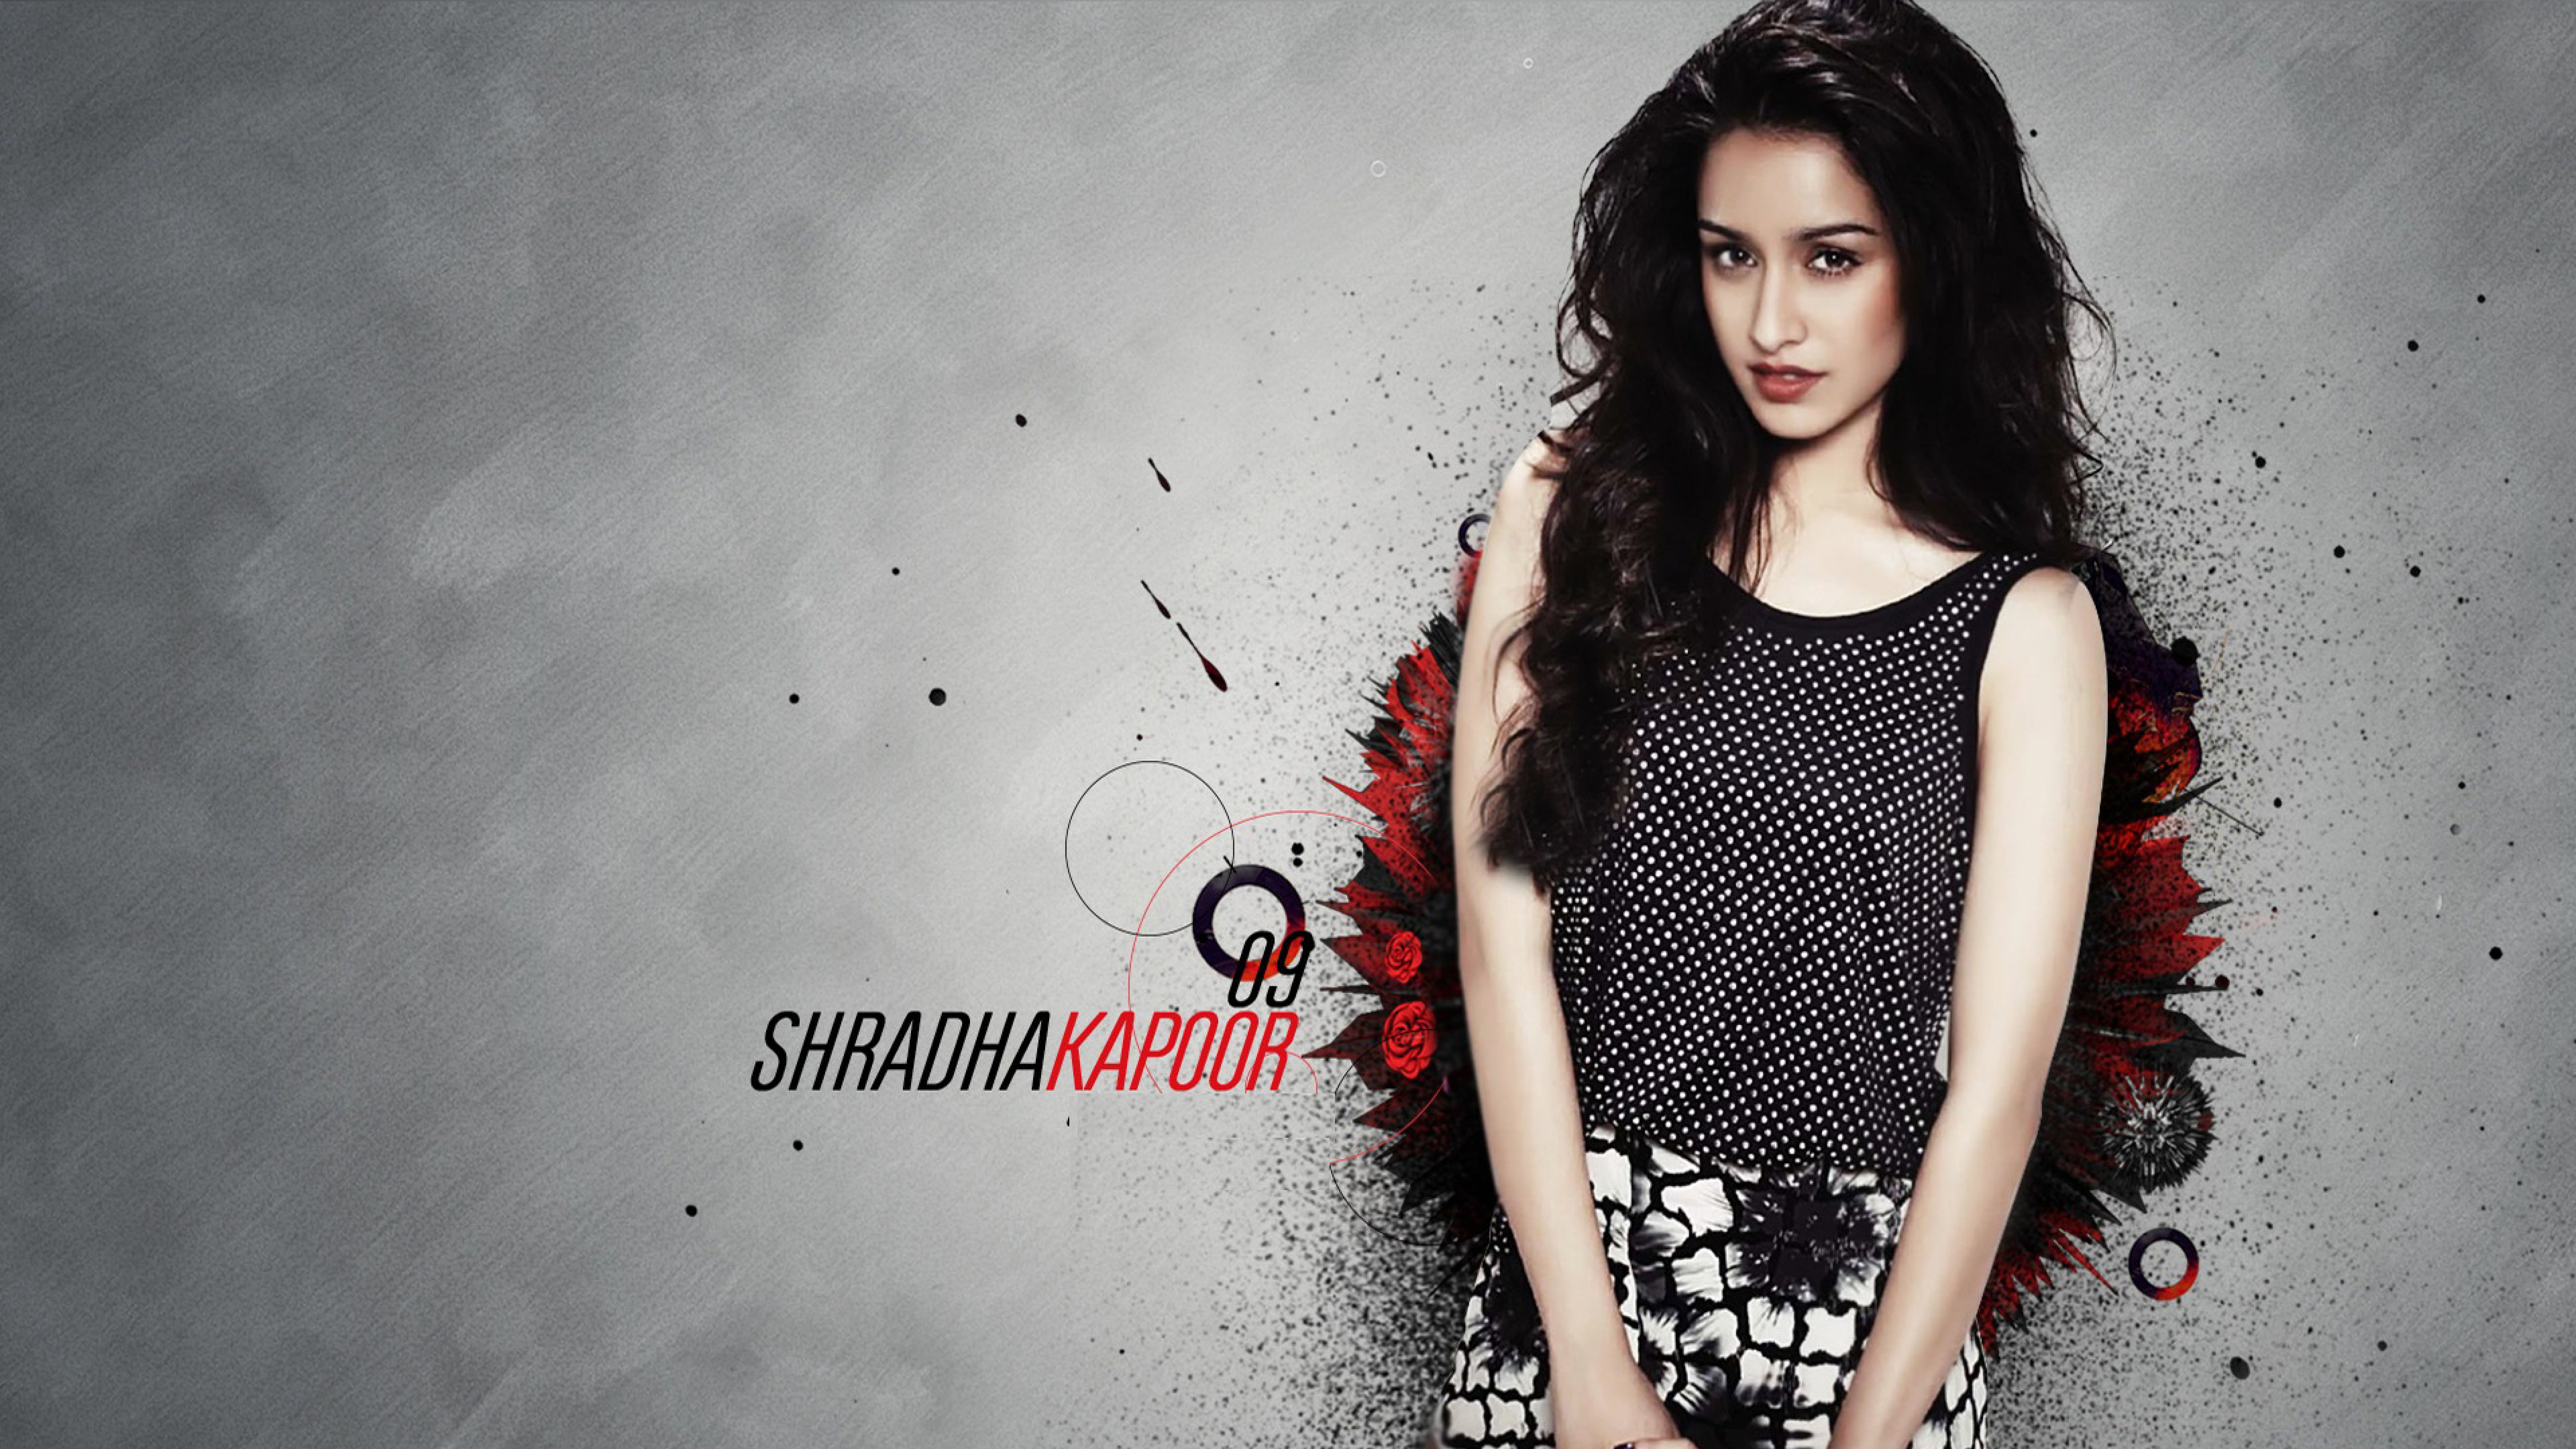 Shraddha Kapoor latest wallpaper 8K Wallpaper, HD Indian Celebrities 4K Wallpaper, Image, Photo and Background